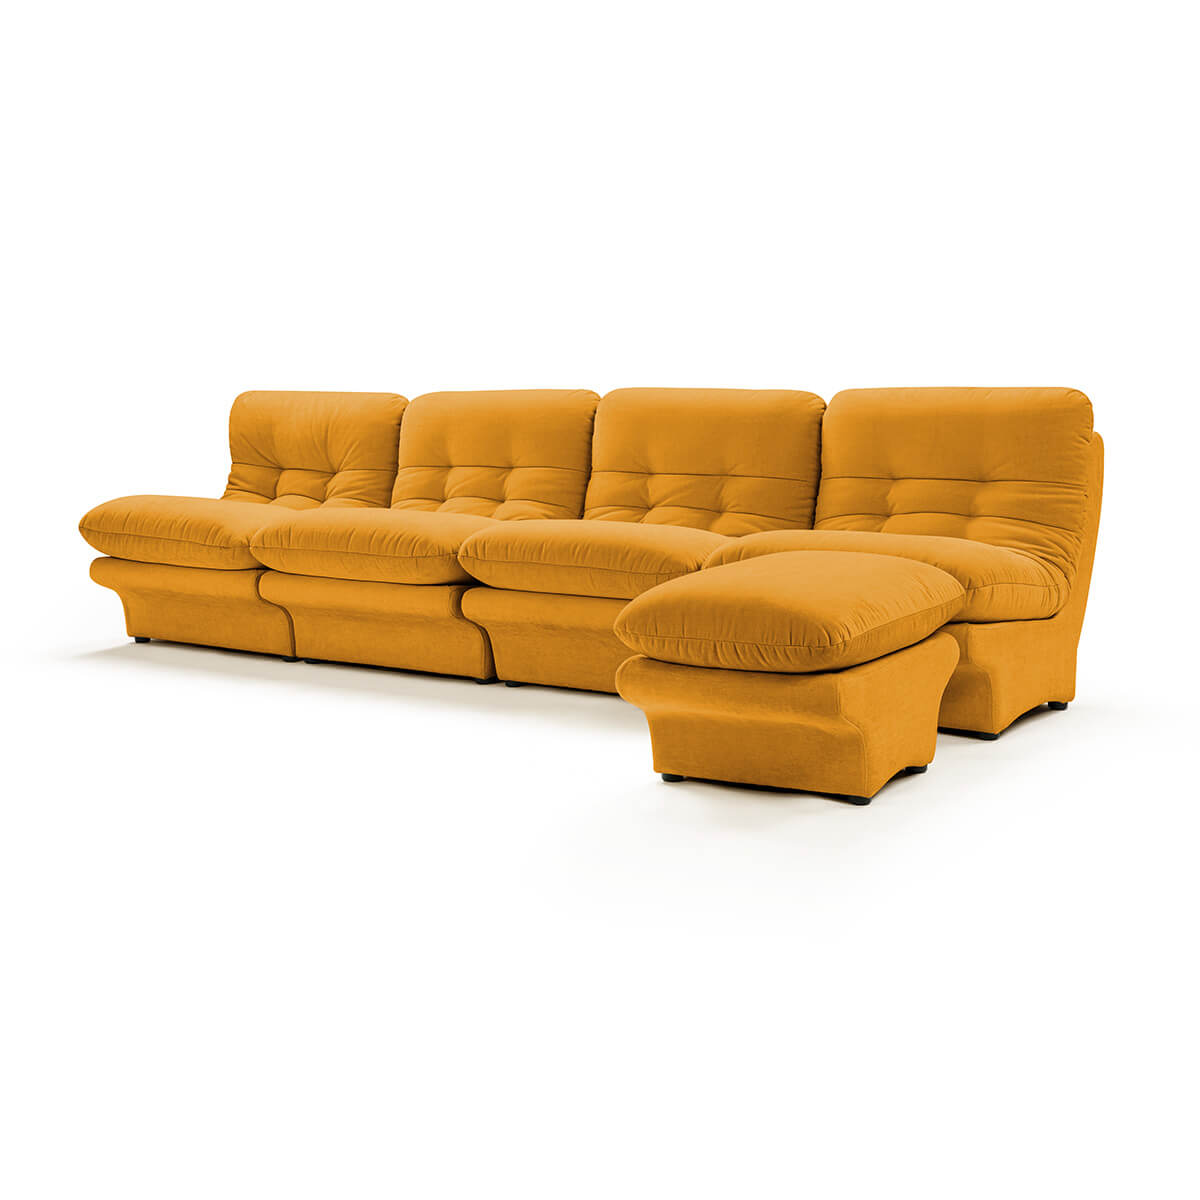 Carsons Mid Century Curved Modular Sectional Sofa / Combination 002 Chenille Helios-Mustard Yellow